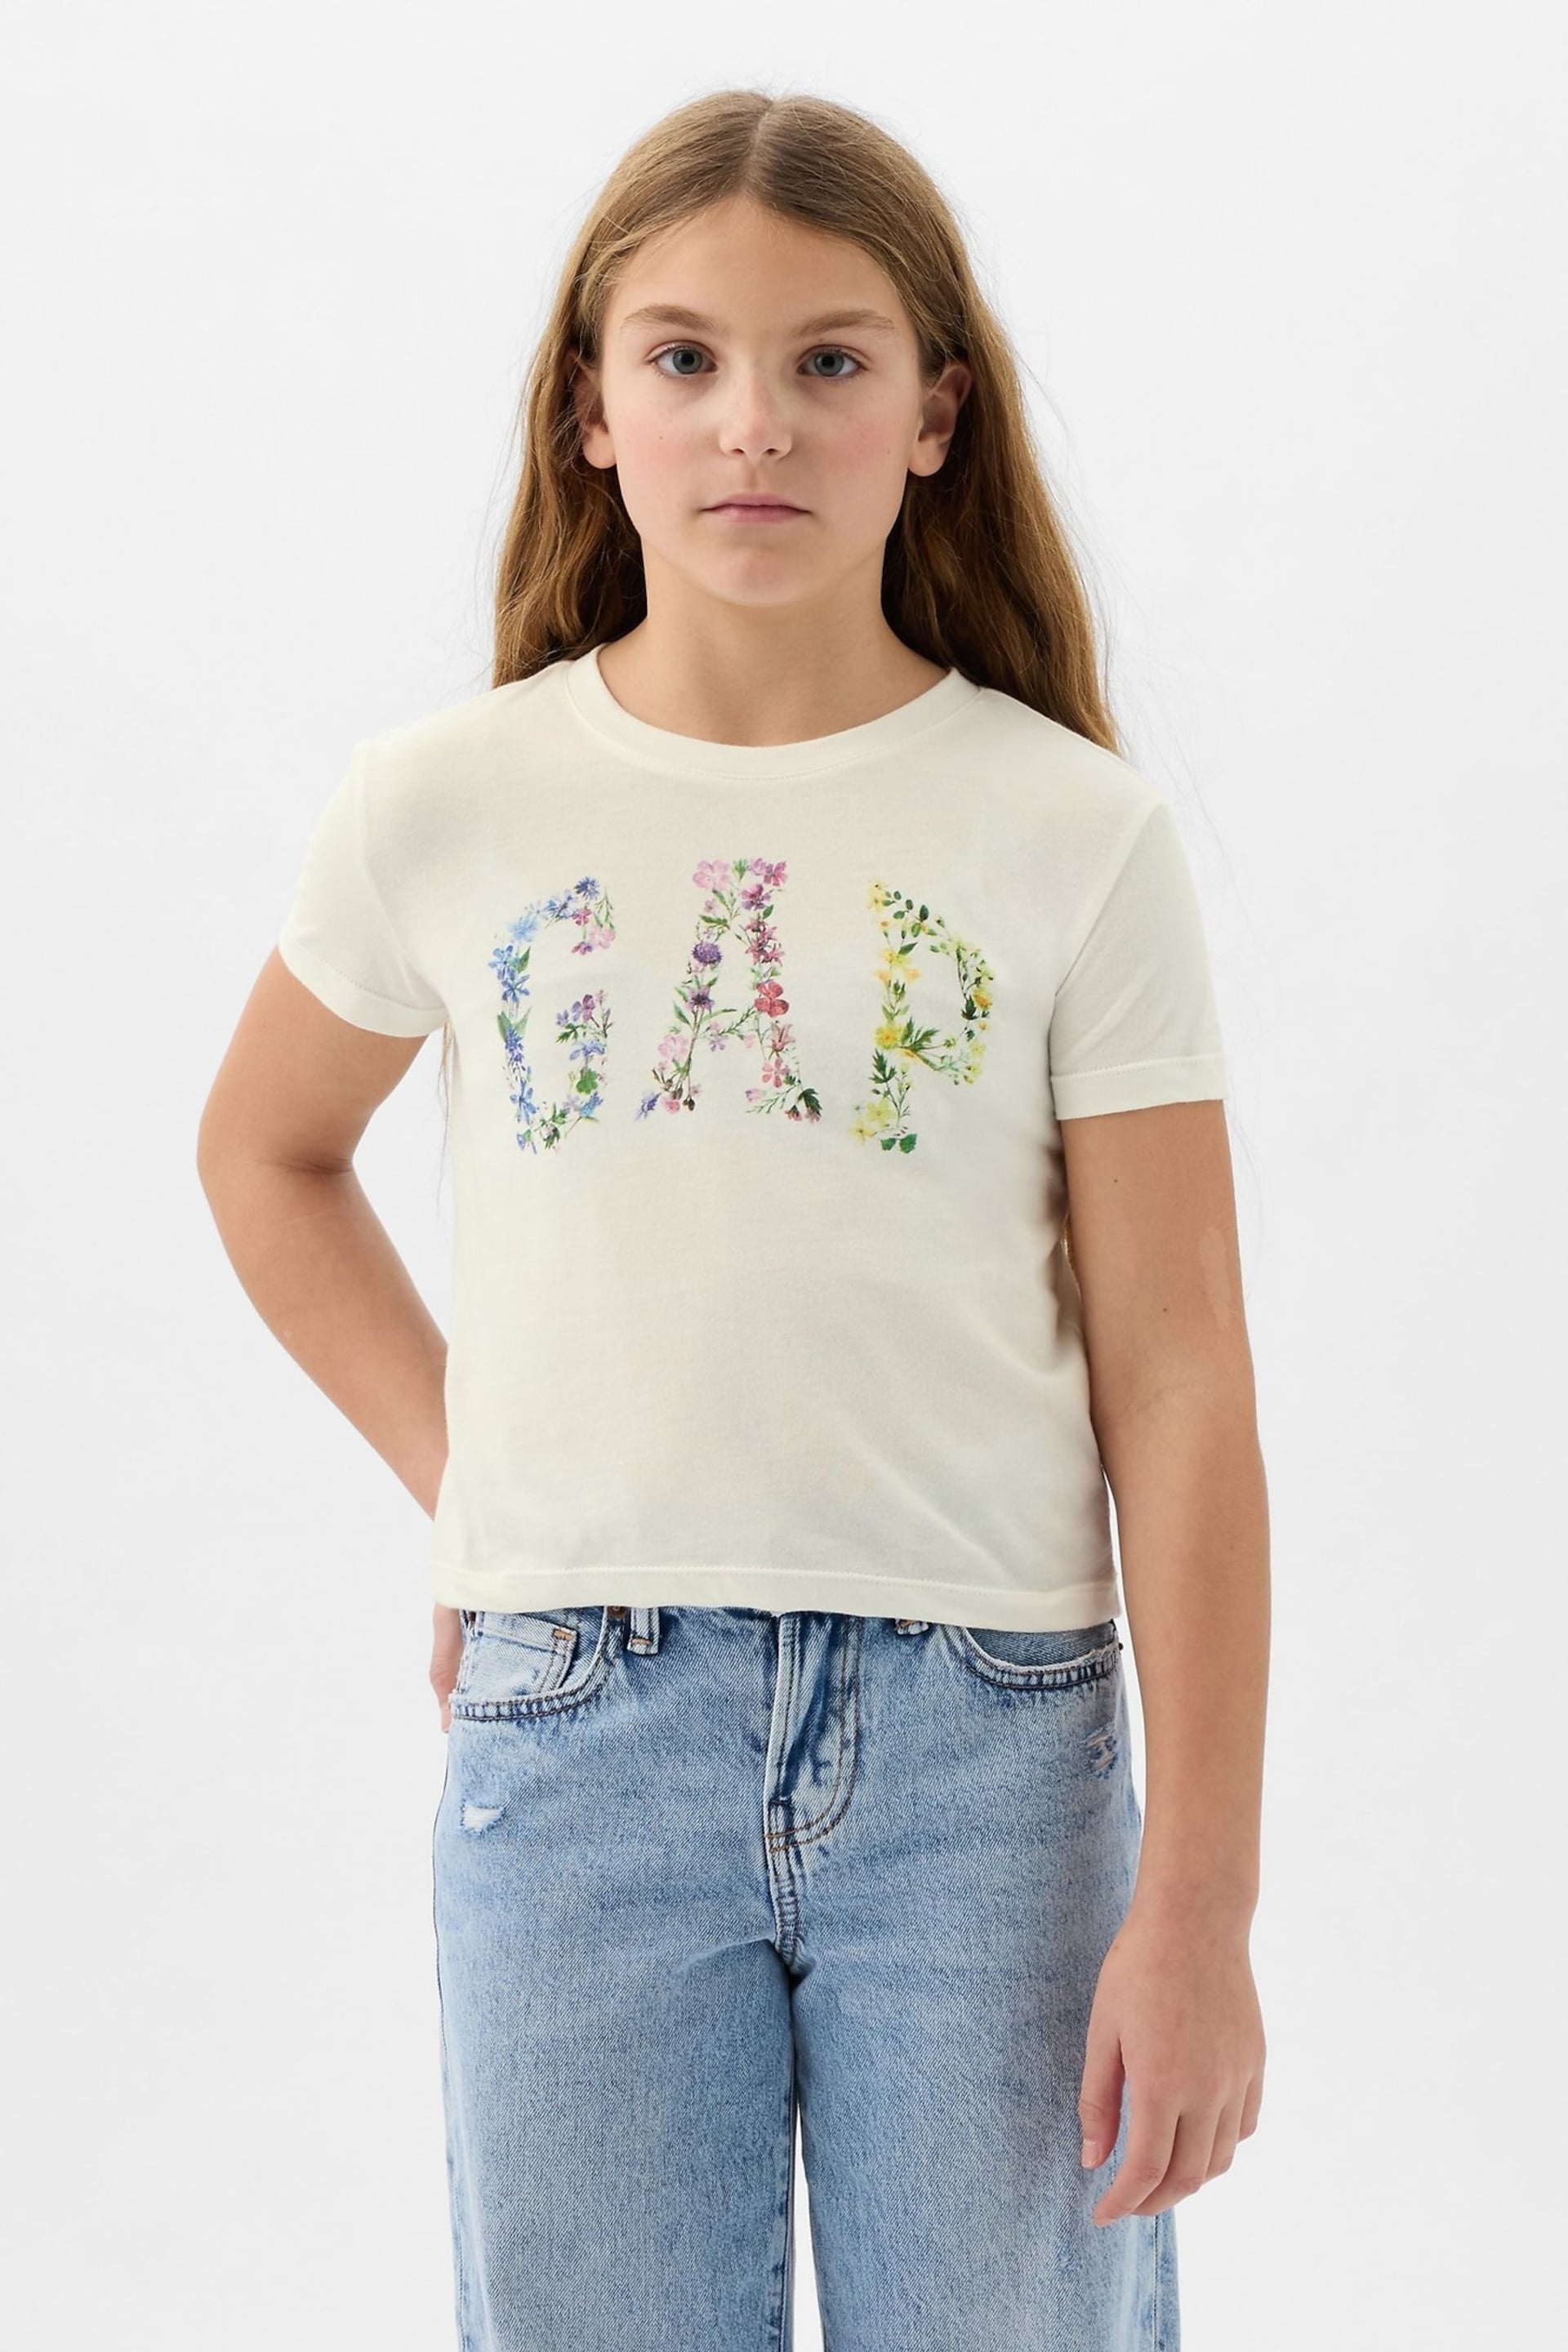 Gap White Floral Graphic Logo Short Sleeve Crew Neck T-Shirt (4-13yrs) - Image 1 of 3